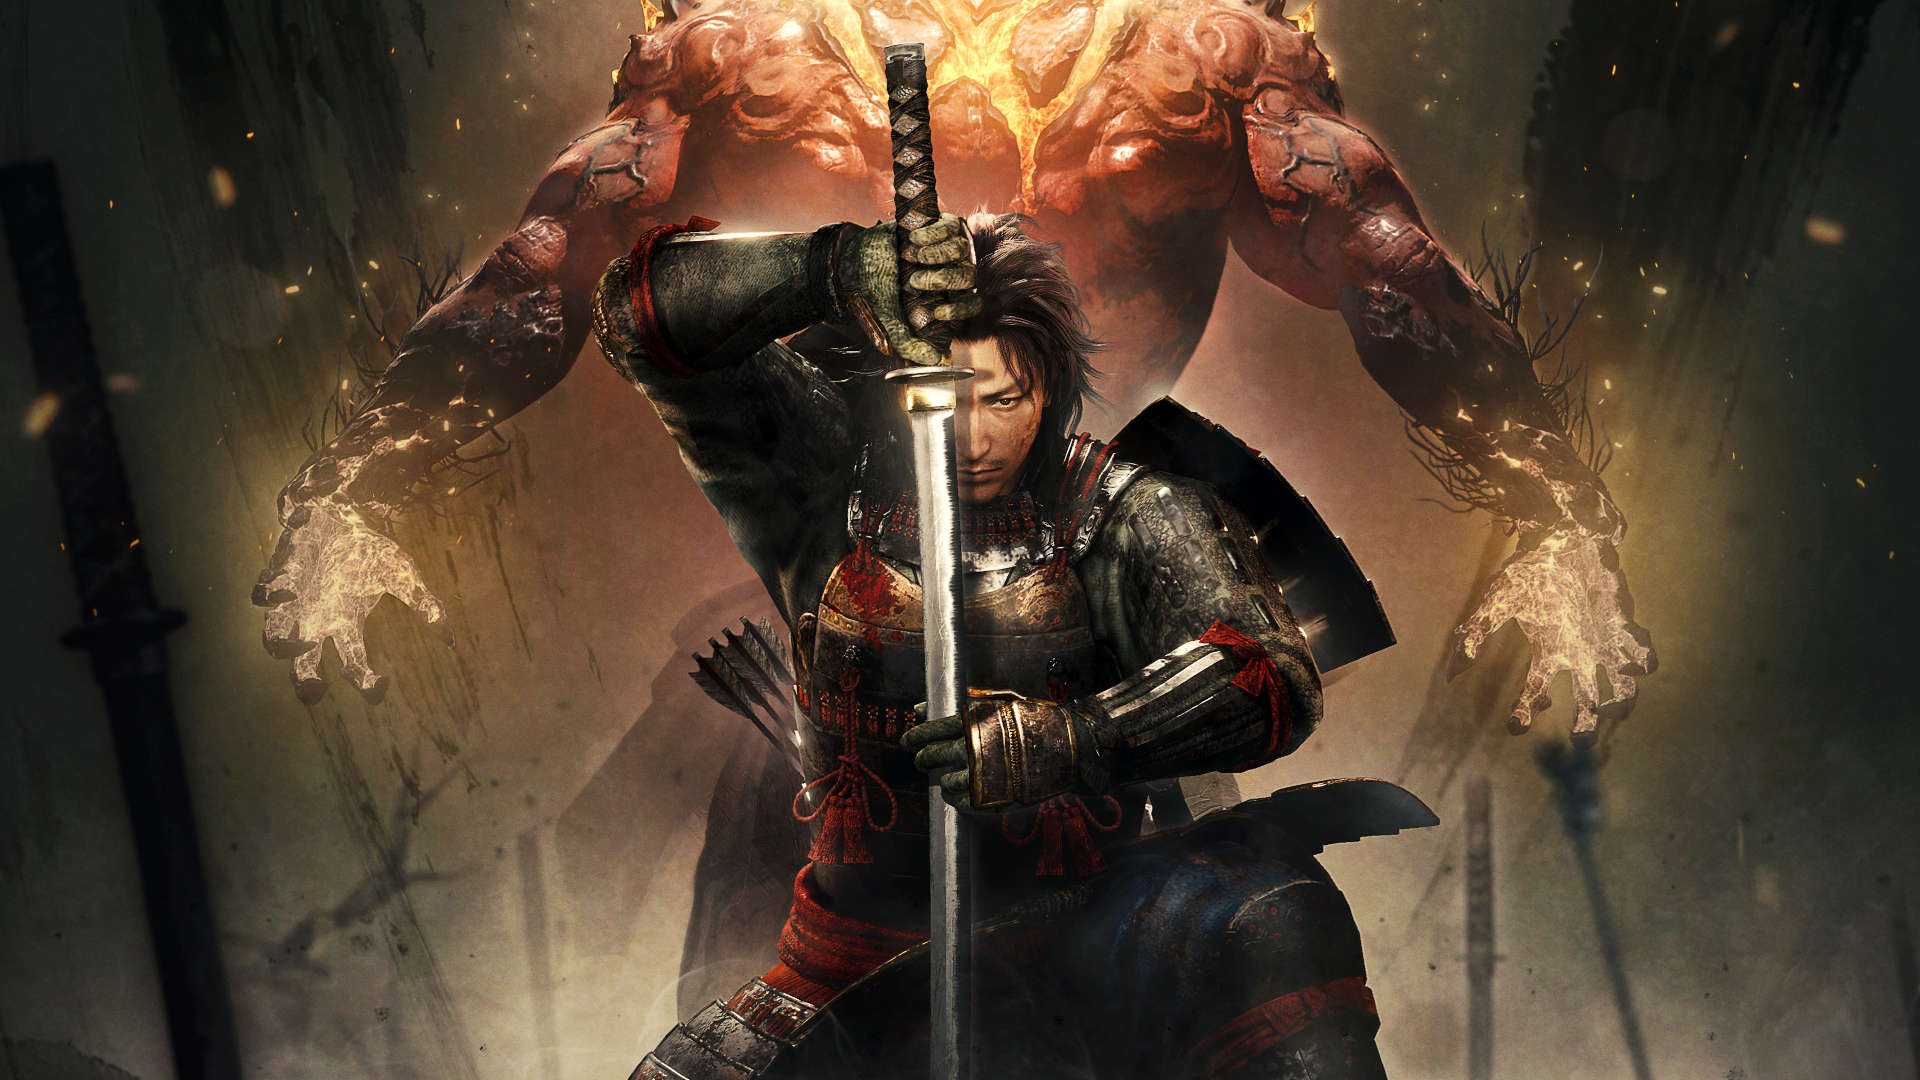 Nioh 2 hits Steam, immediately surpasses Dark Souls' player count record